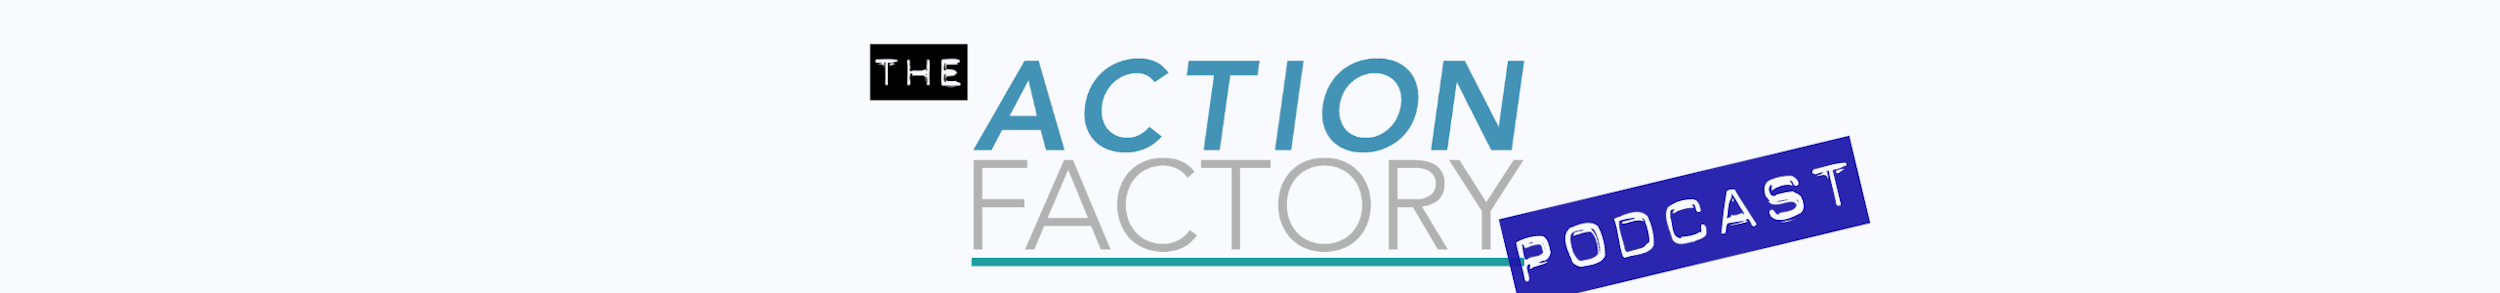 The Action Factory Podcast